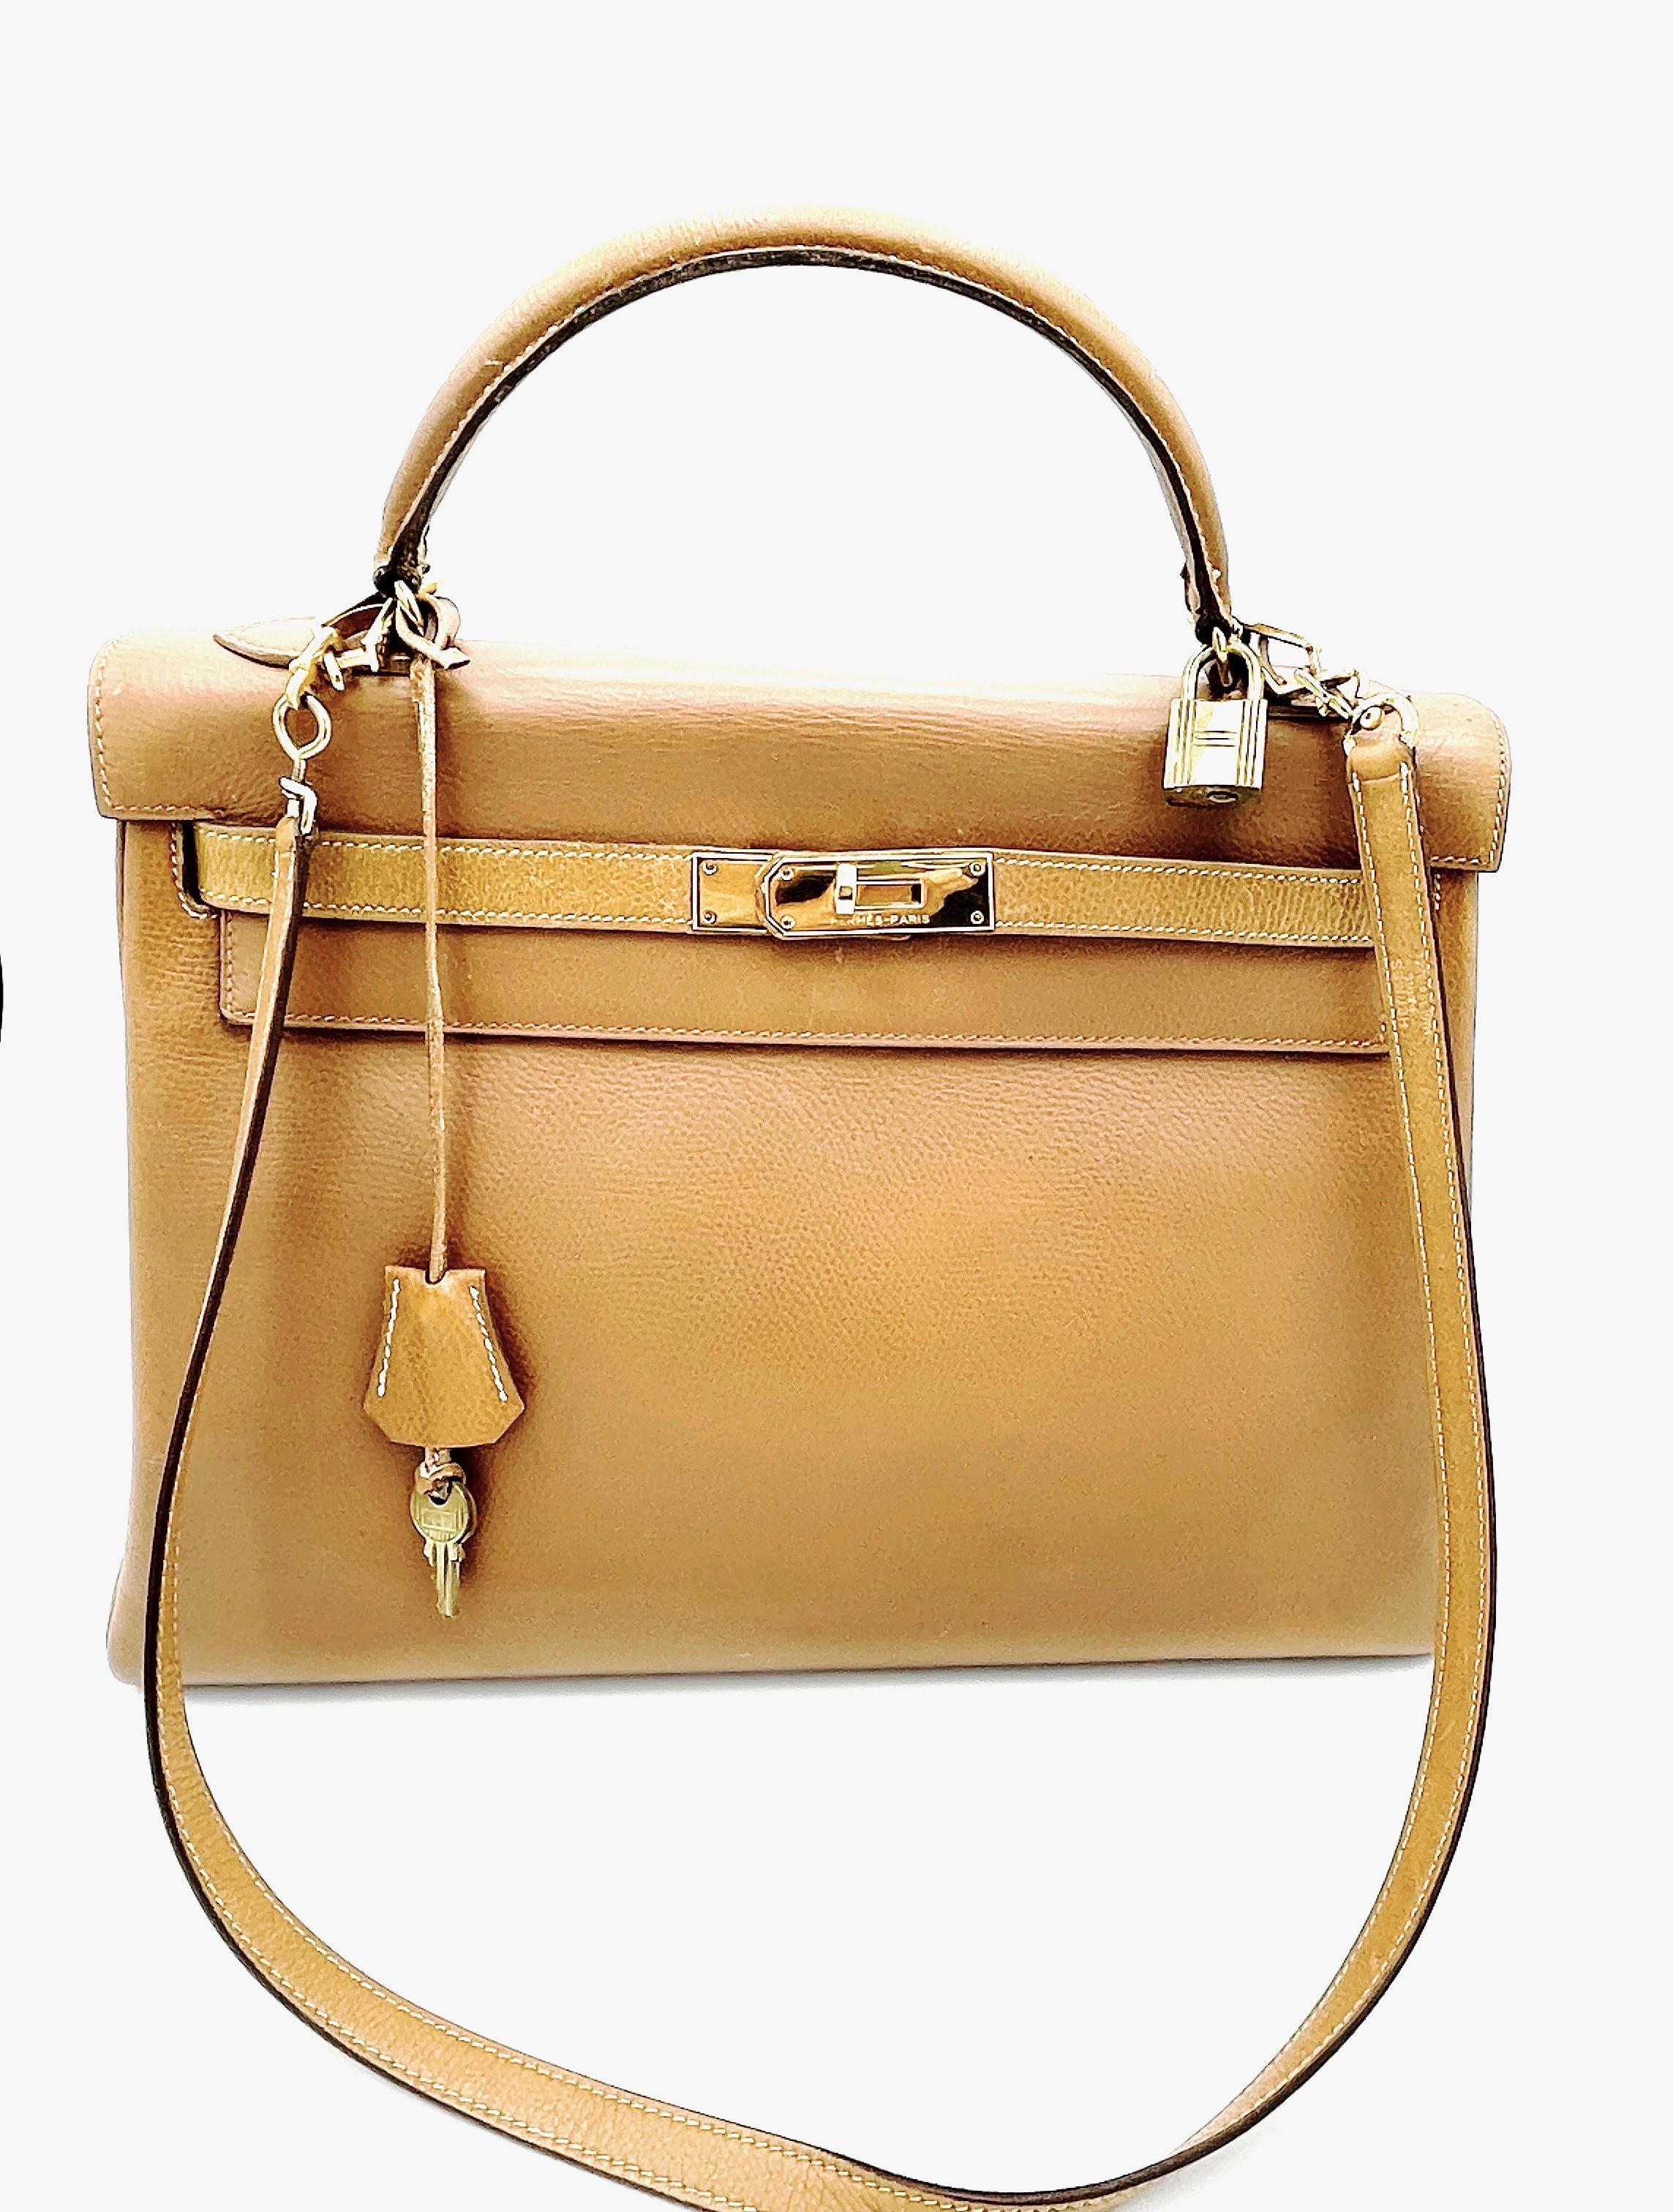 Hermés 2 way Kelly bag, Retourne, 32 cm, Curchevel leather in gold, Collection L in circle = 1982 with long autentic Strap, Lock and Key and Hermes dustbag. 
The bag has been revised and is again in good condition. Interior with 3 compartments,